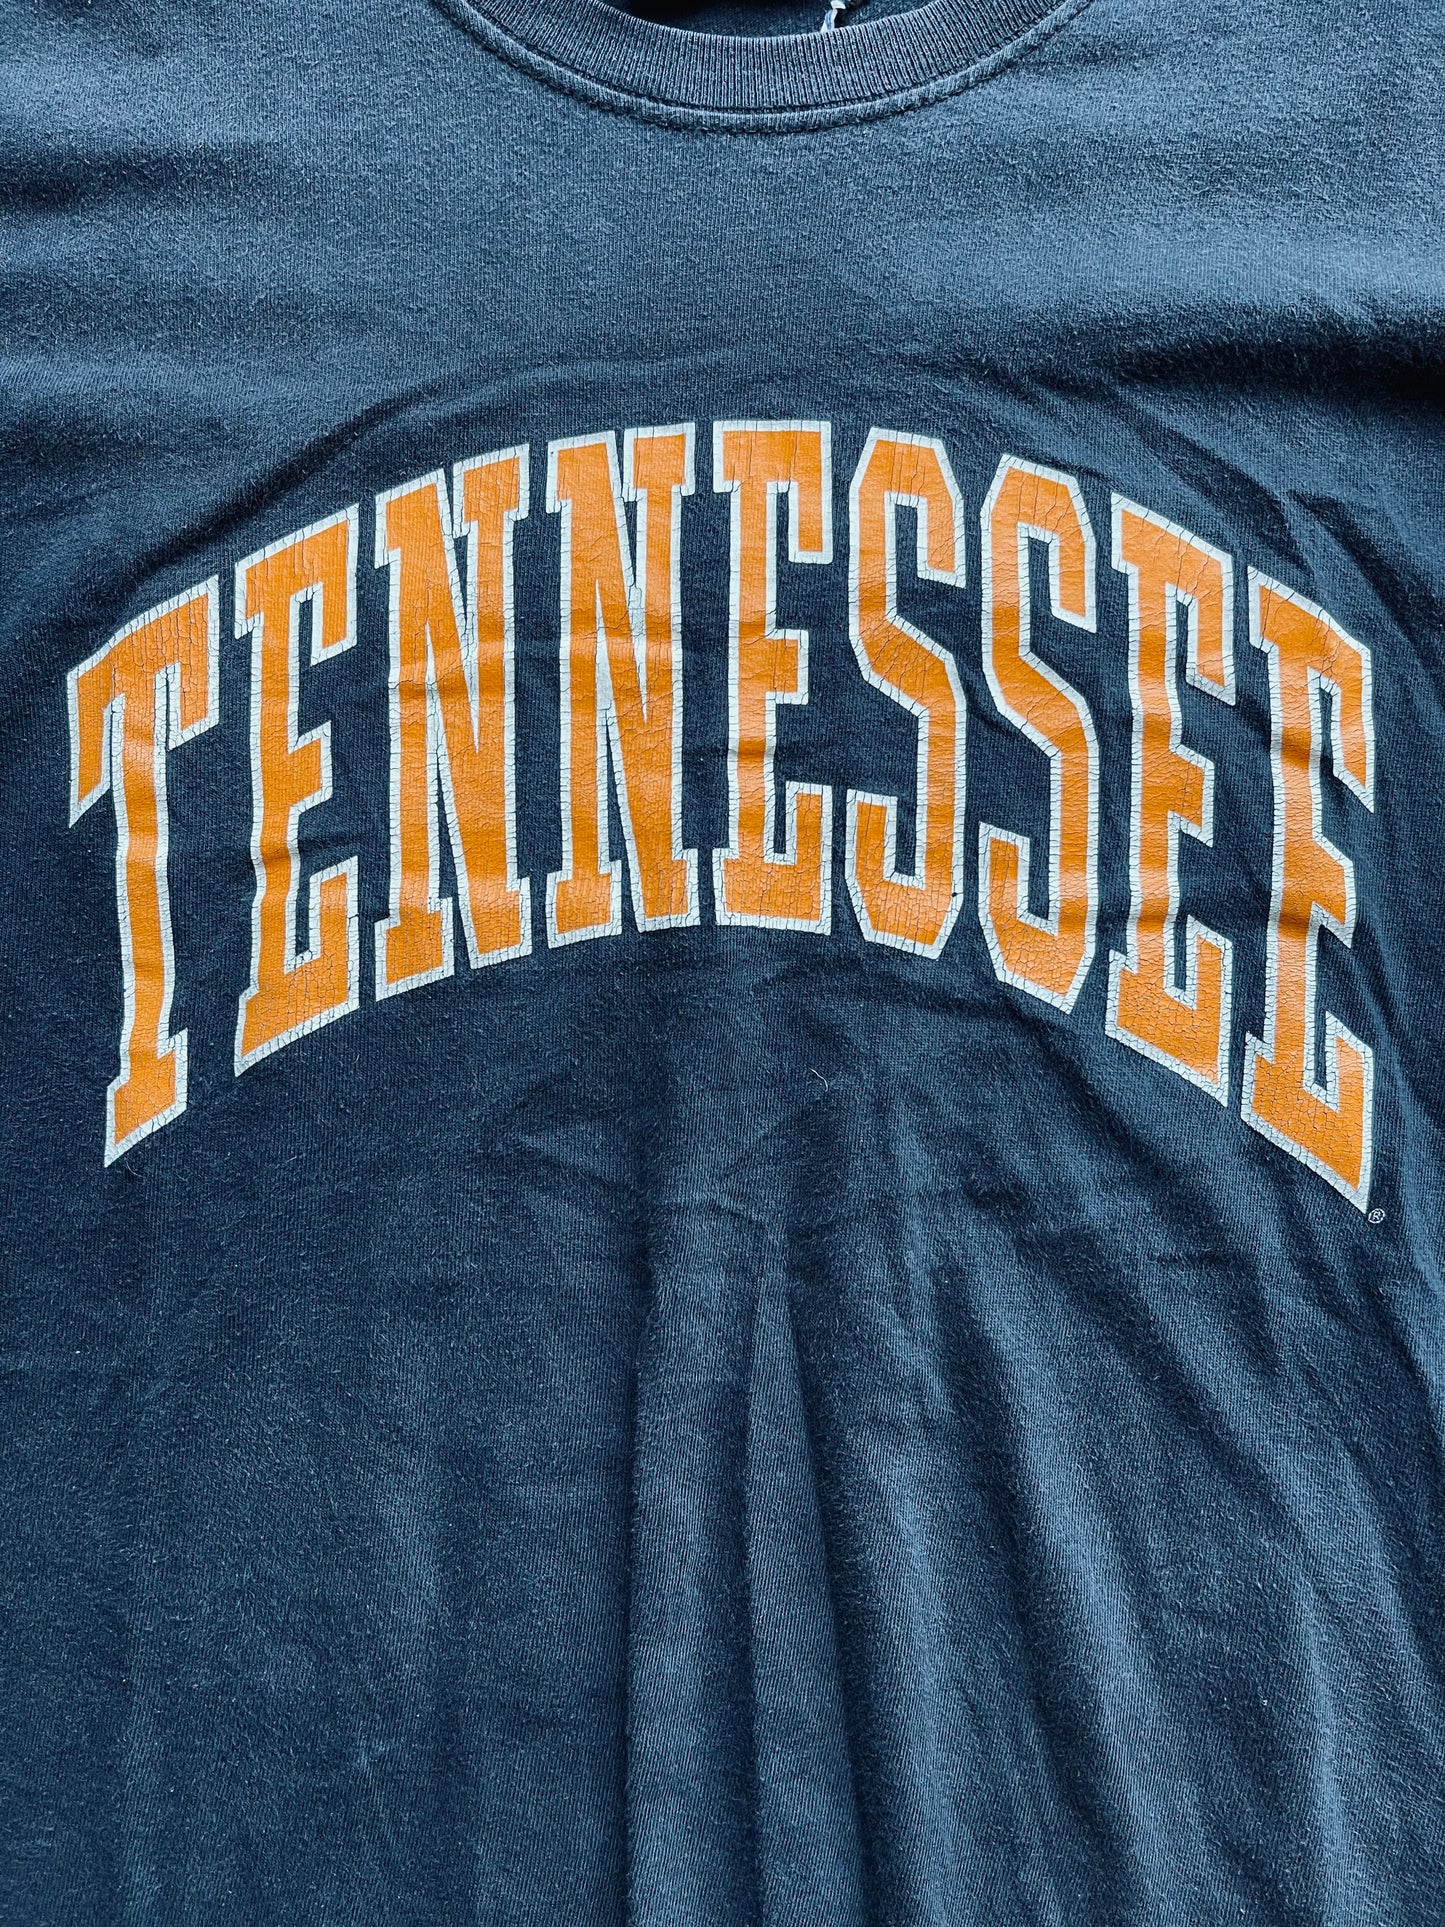 Vintage University of Tennessee Graphic Tee